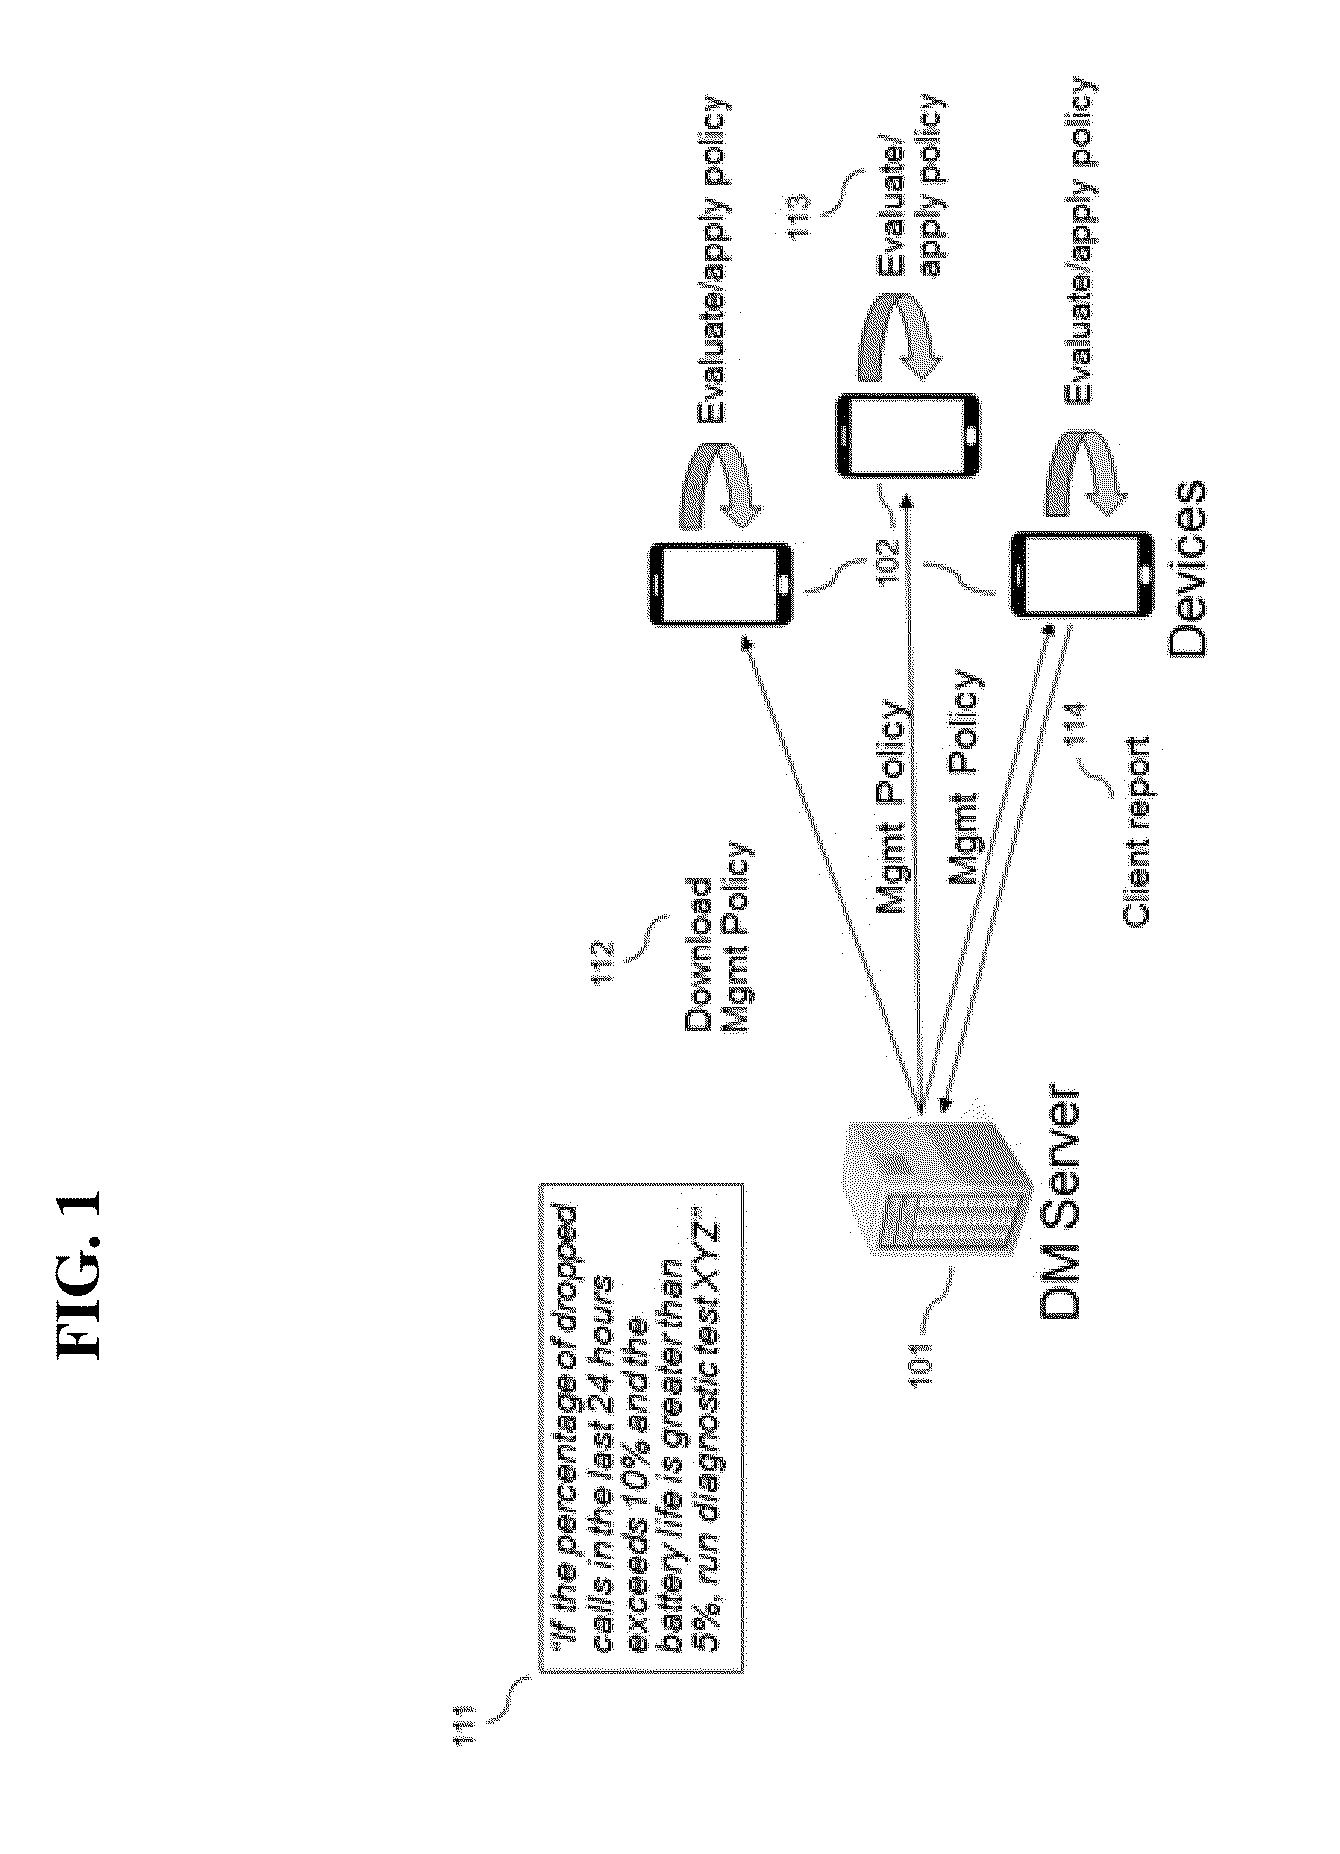 System and method for controlling the trigger and execution of management policies